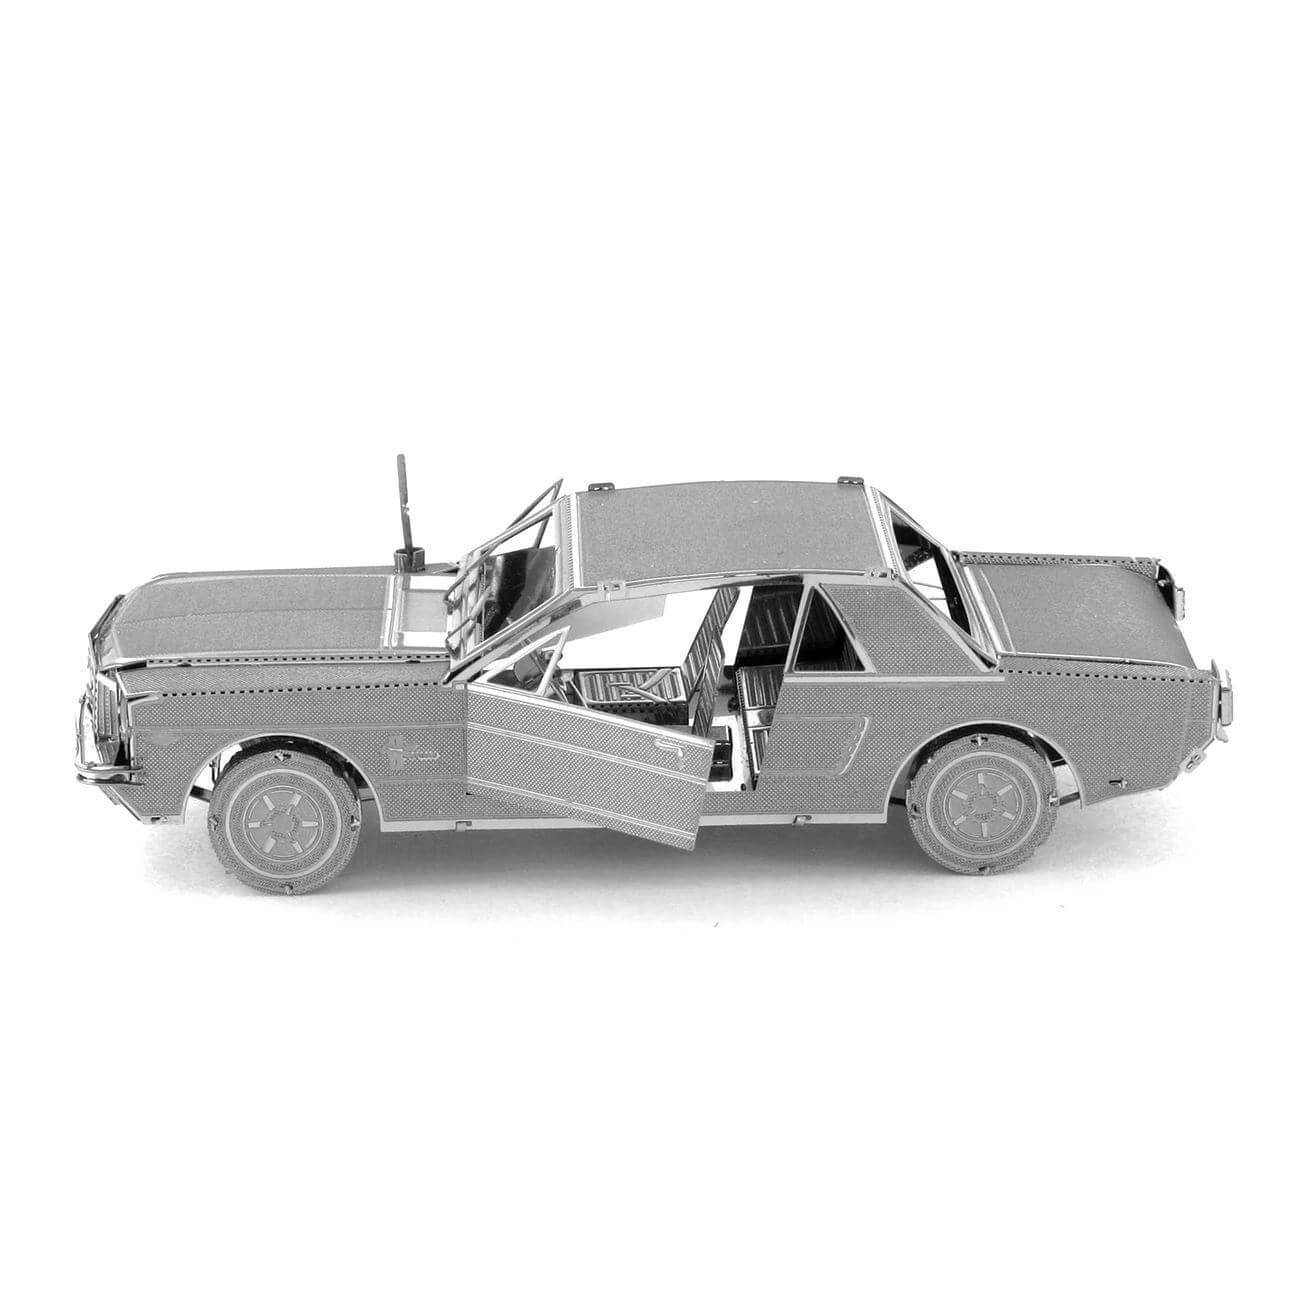 Side view of the metal model car.